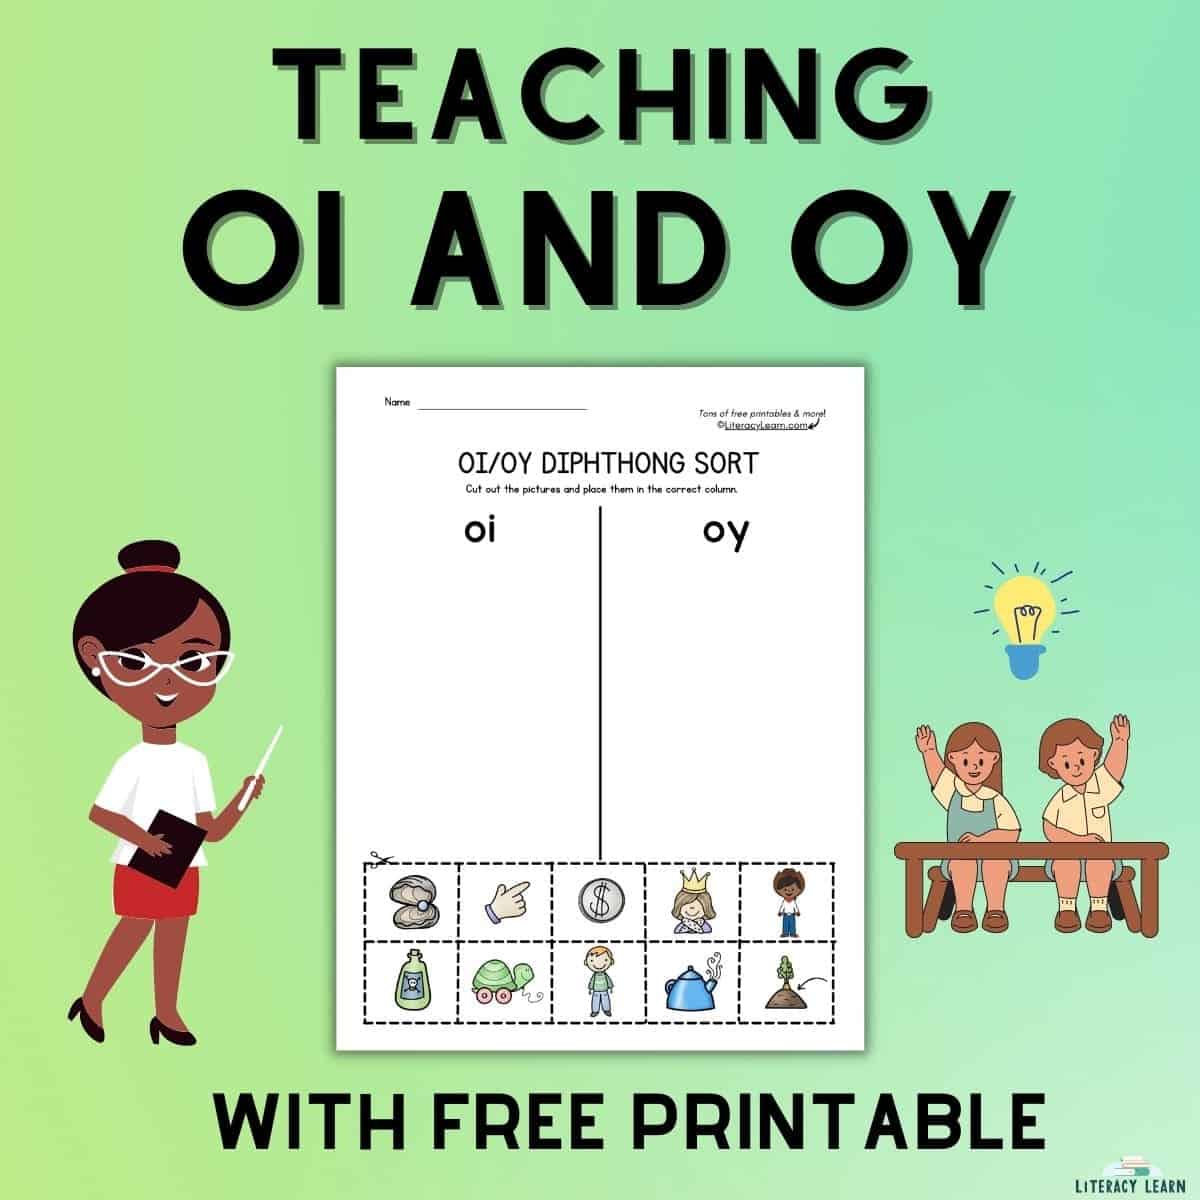 Diphthongs OI and OY with free printable worksheet displayed and clipart of teacher and students.